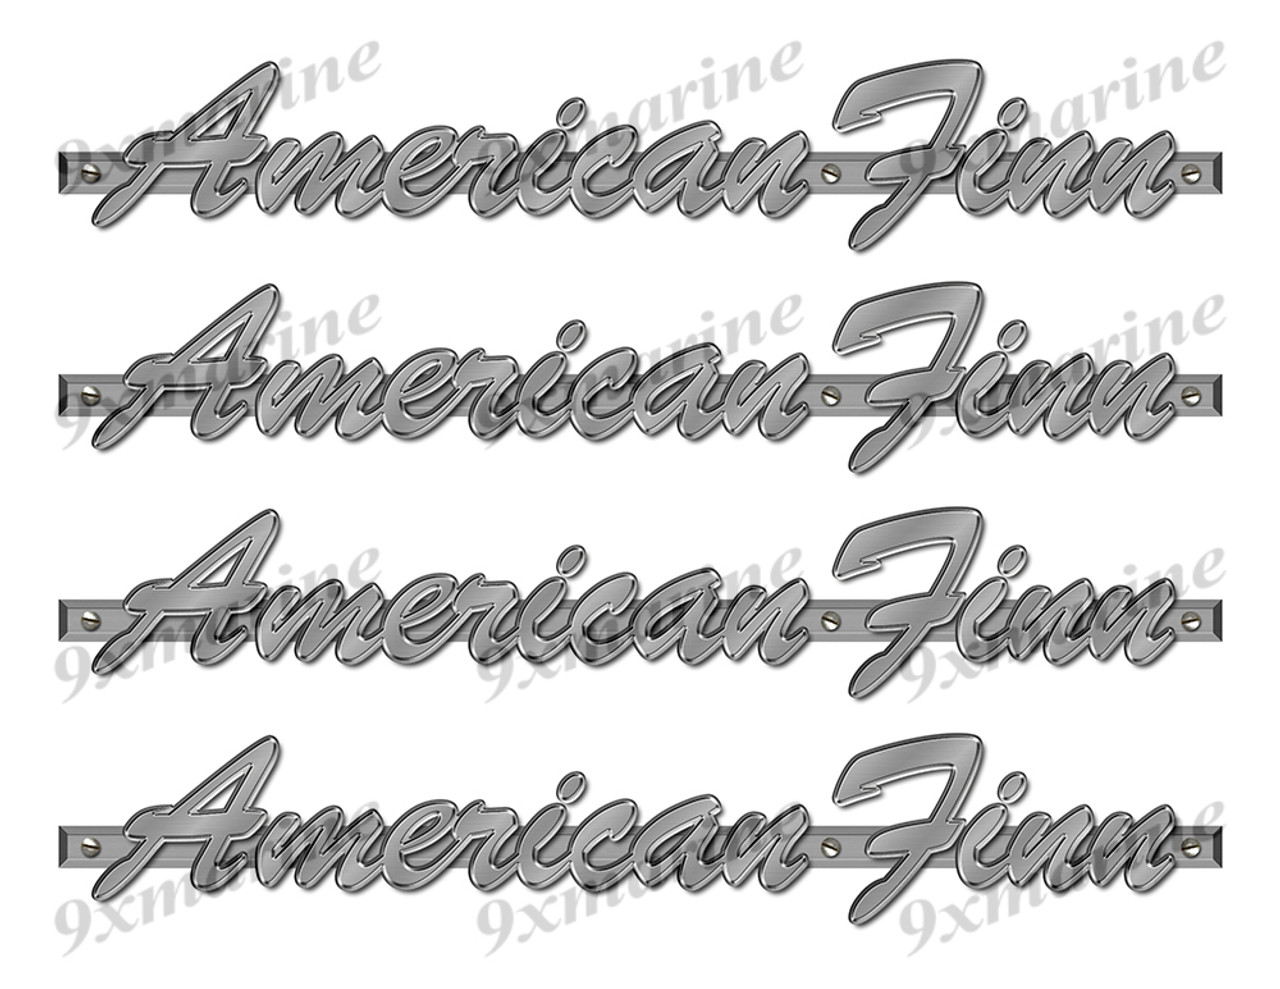 4 American Finn Designer Stickers. Brushed Metal Style - 10" long. Remastered